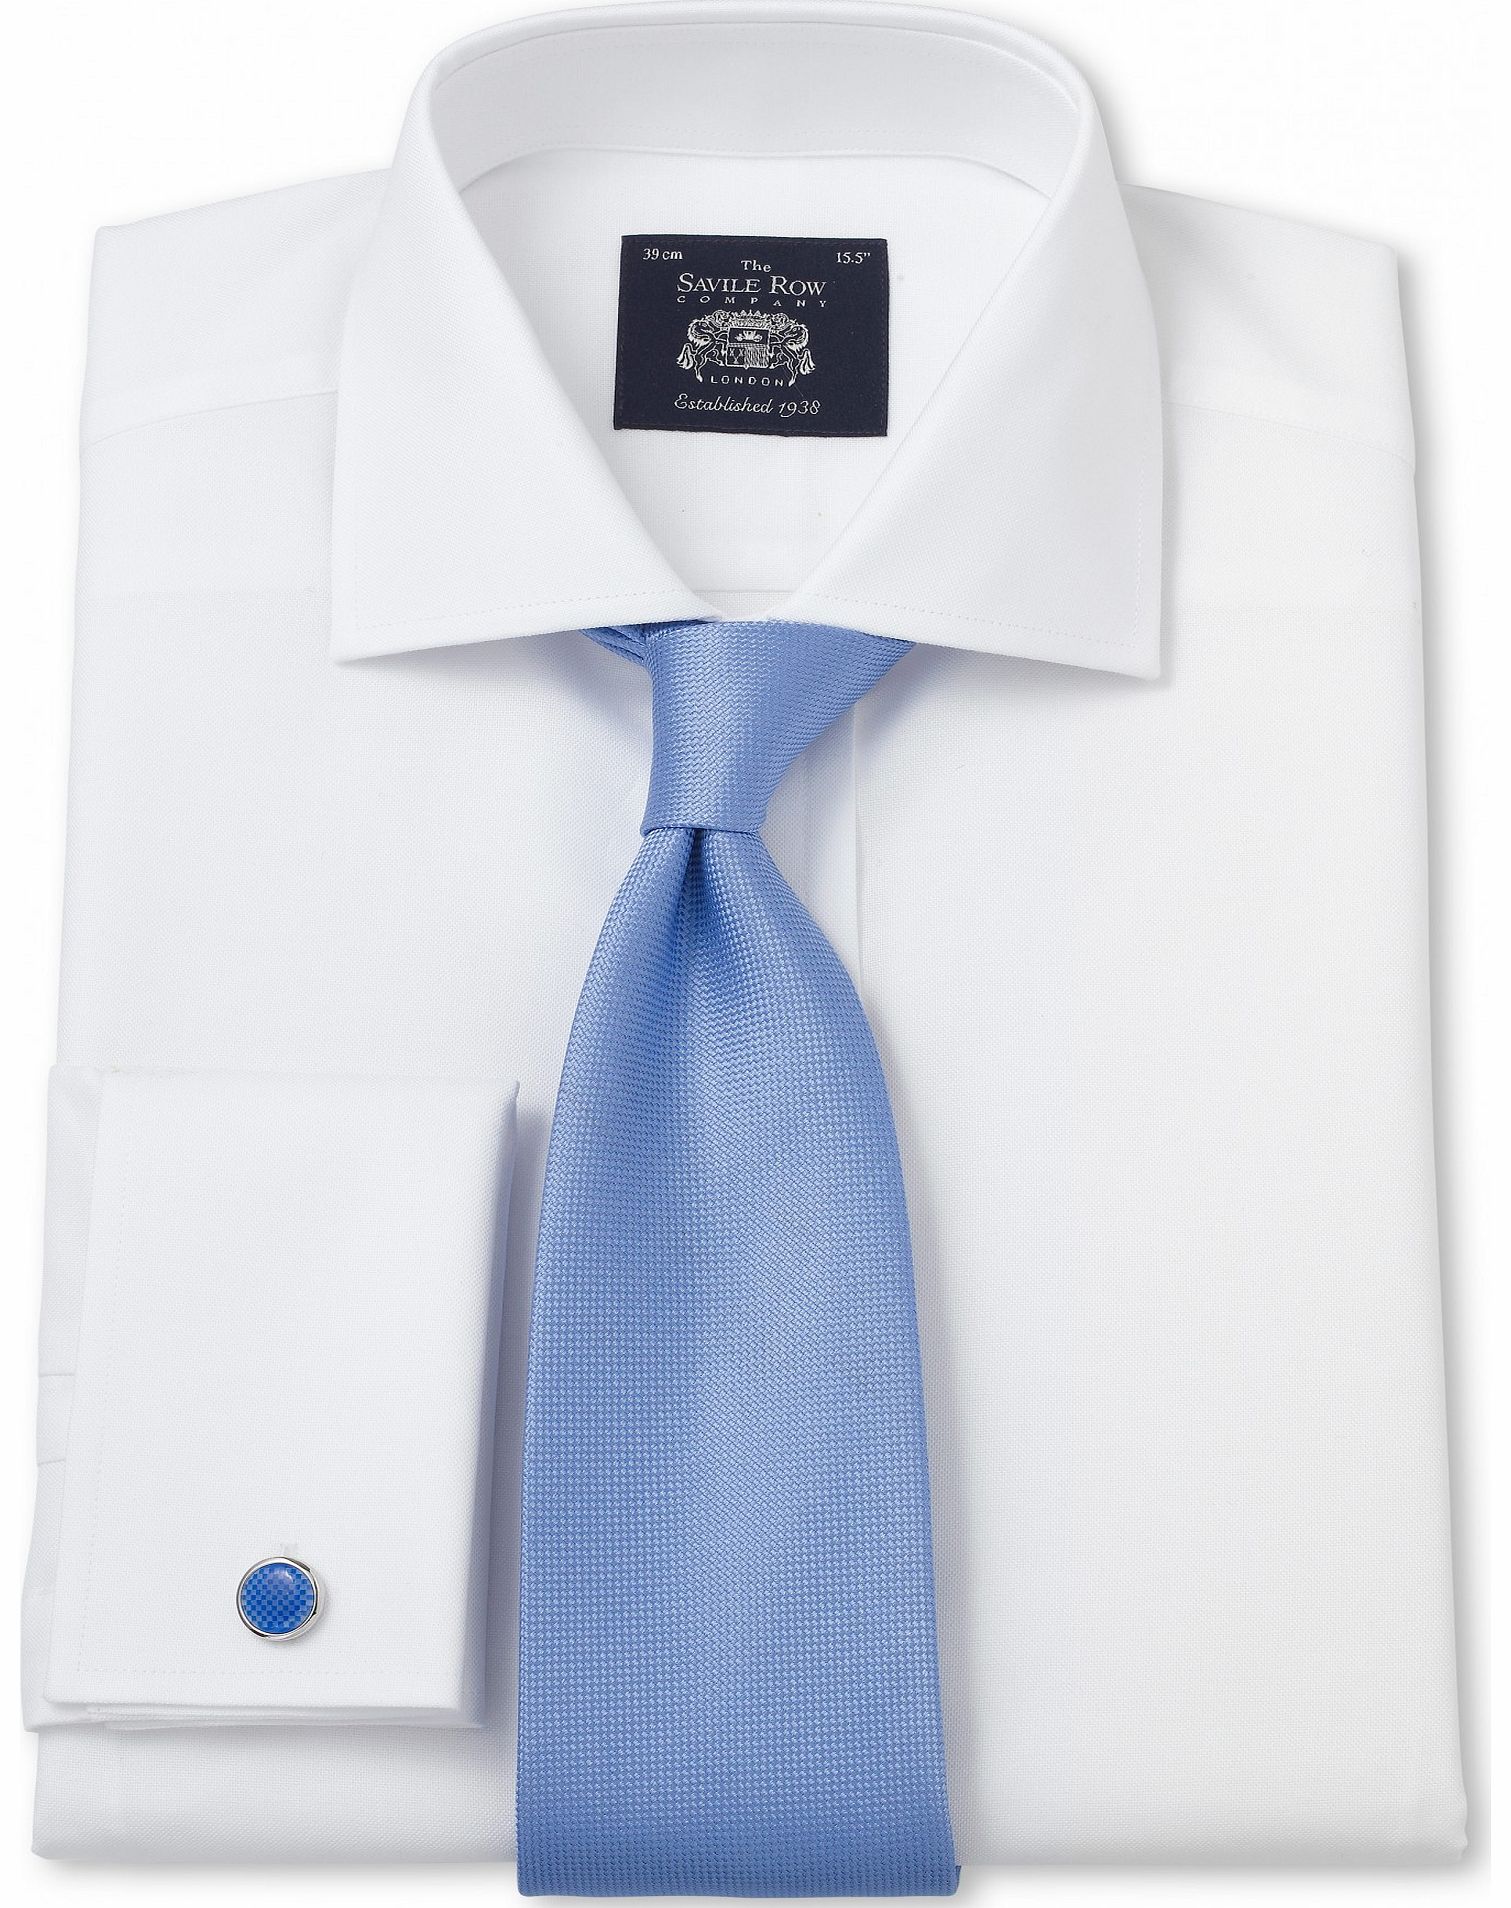 Savile Row Company White Pinpoint Slim Fit Shirt 16`` Lengthened